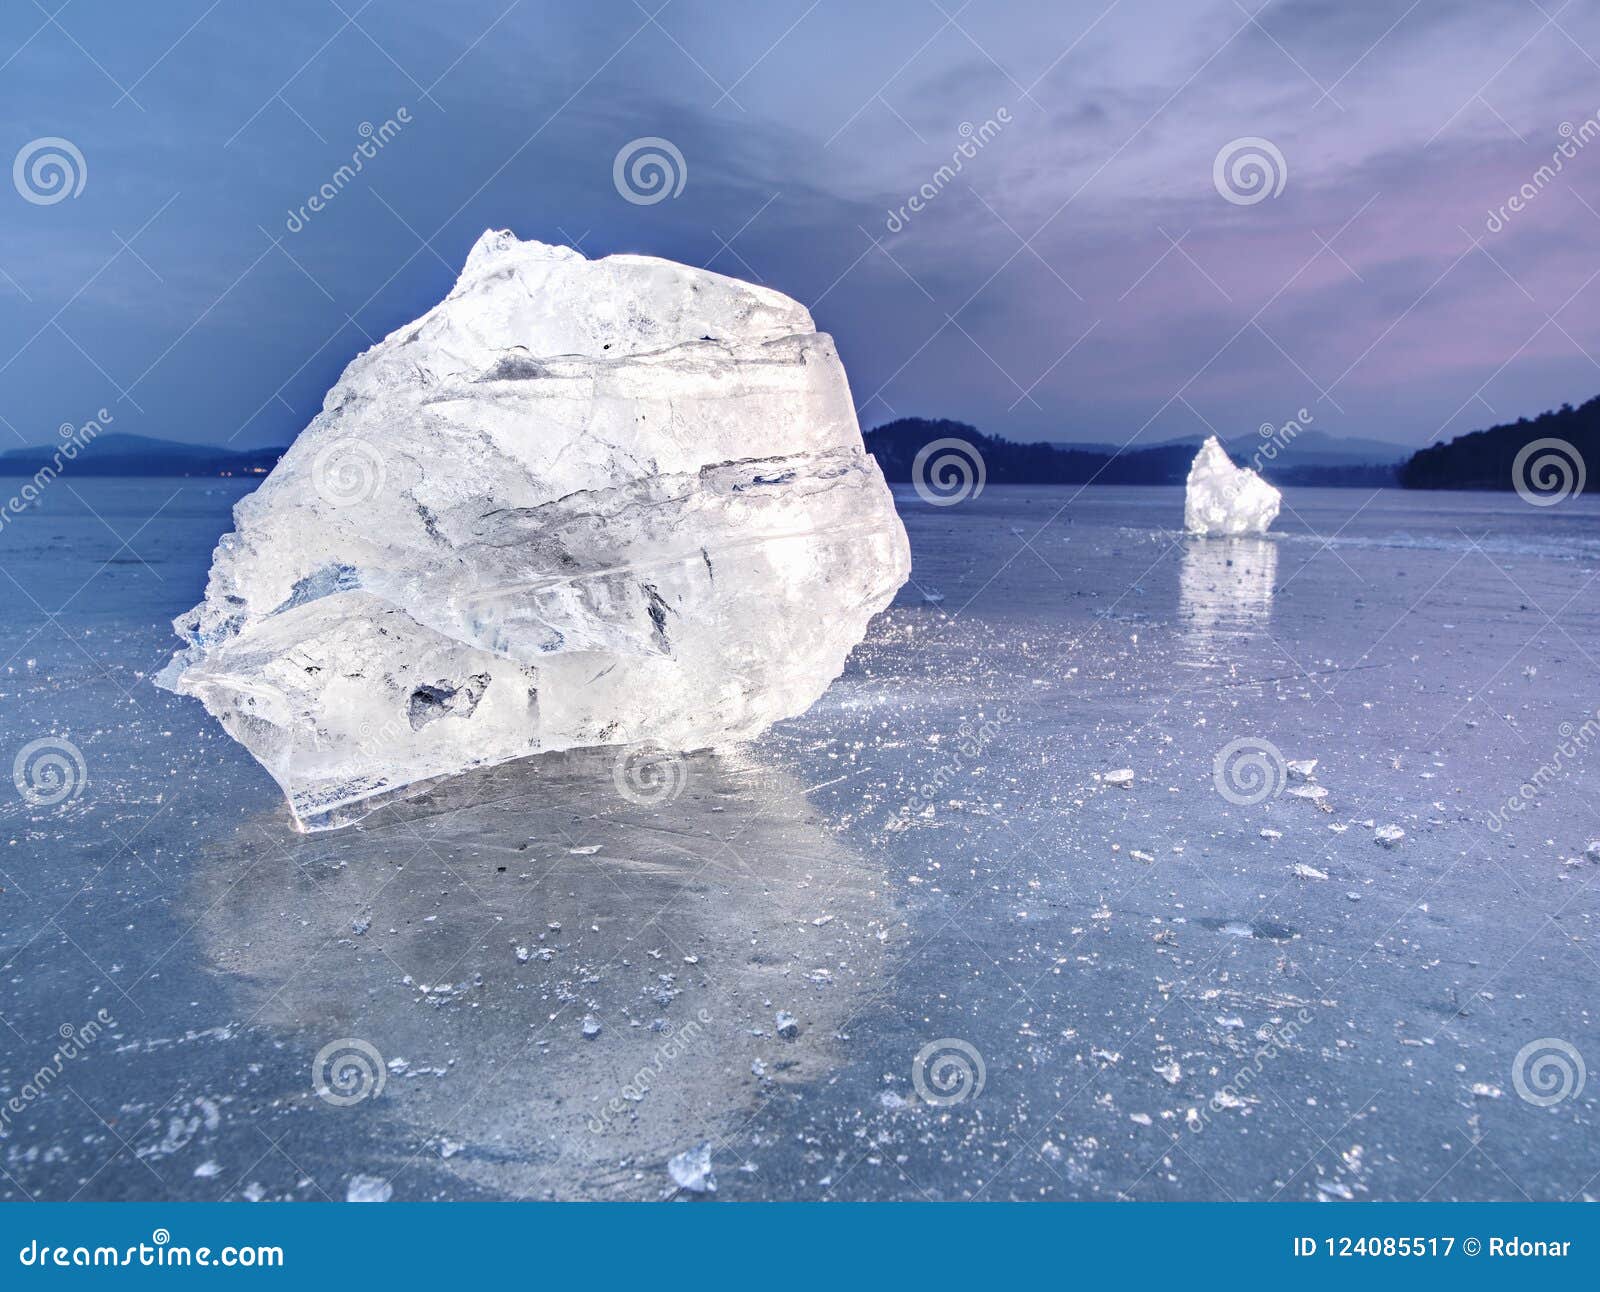 Ice Piece in Blue Shadows, on Dark Natural Background. Stock Image ...